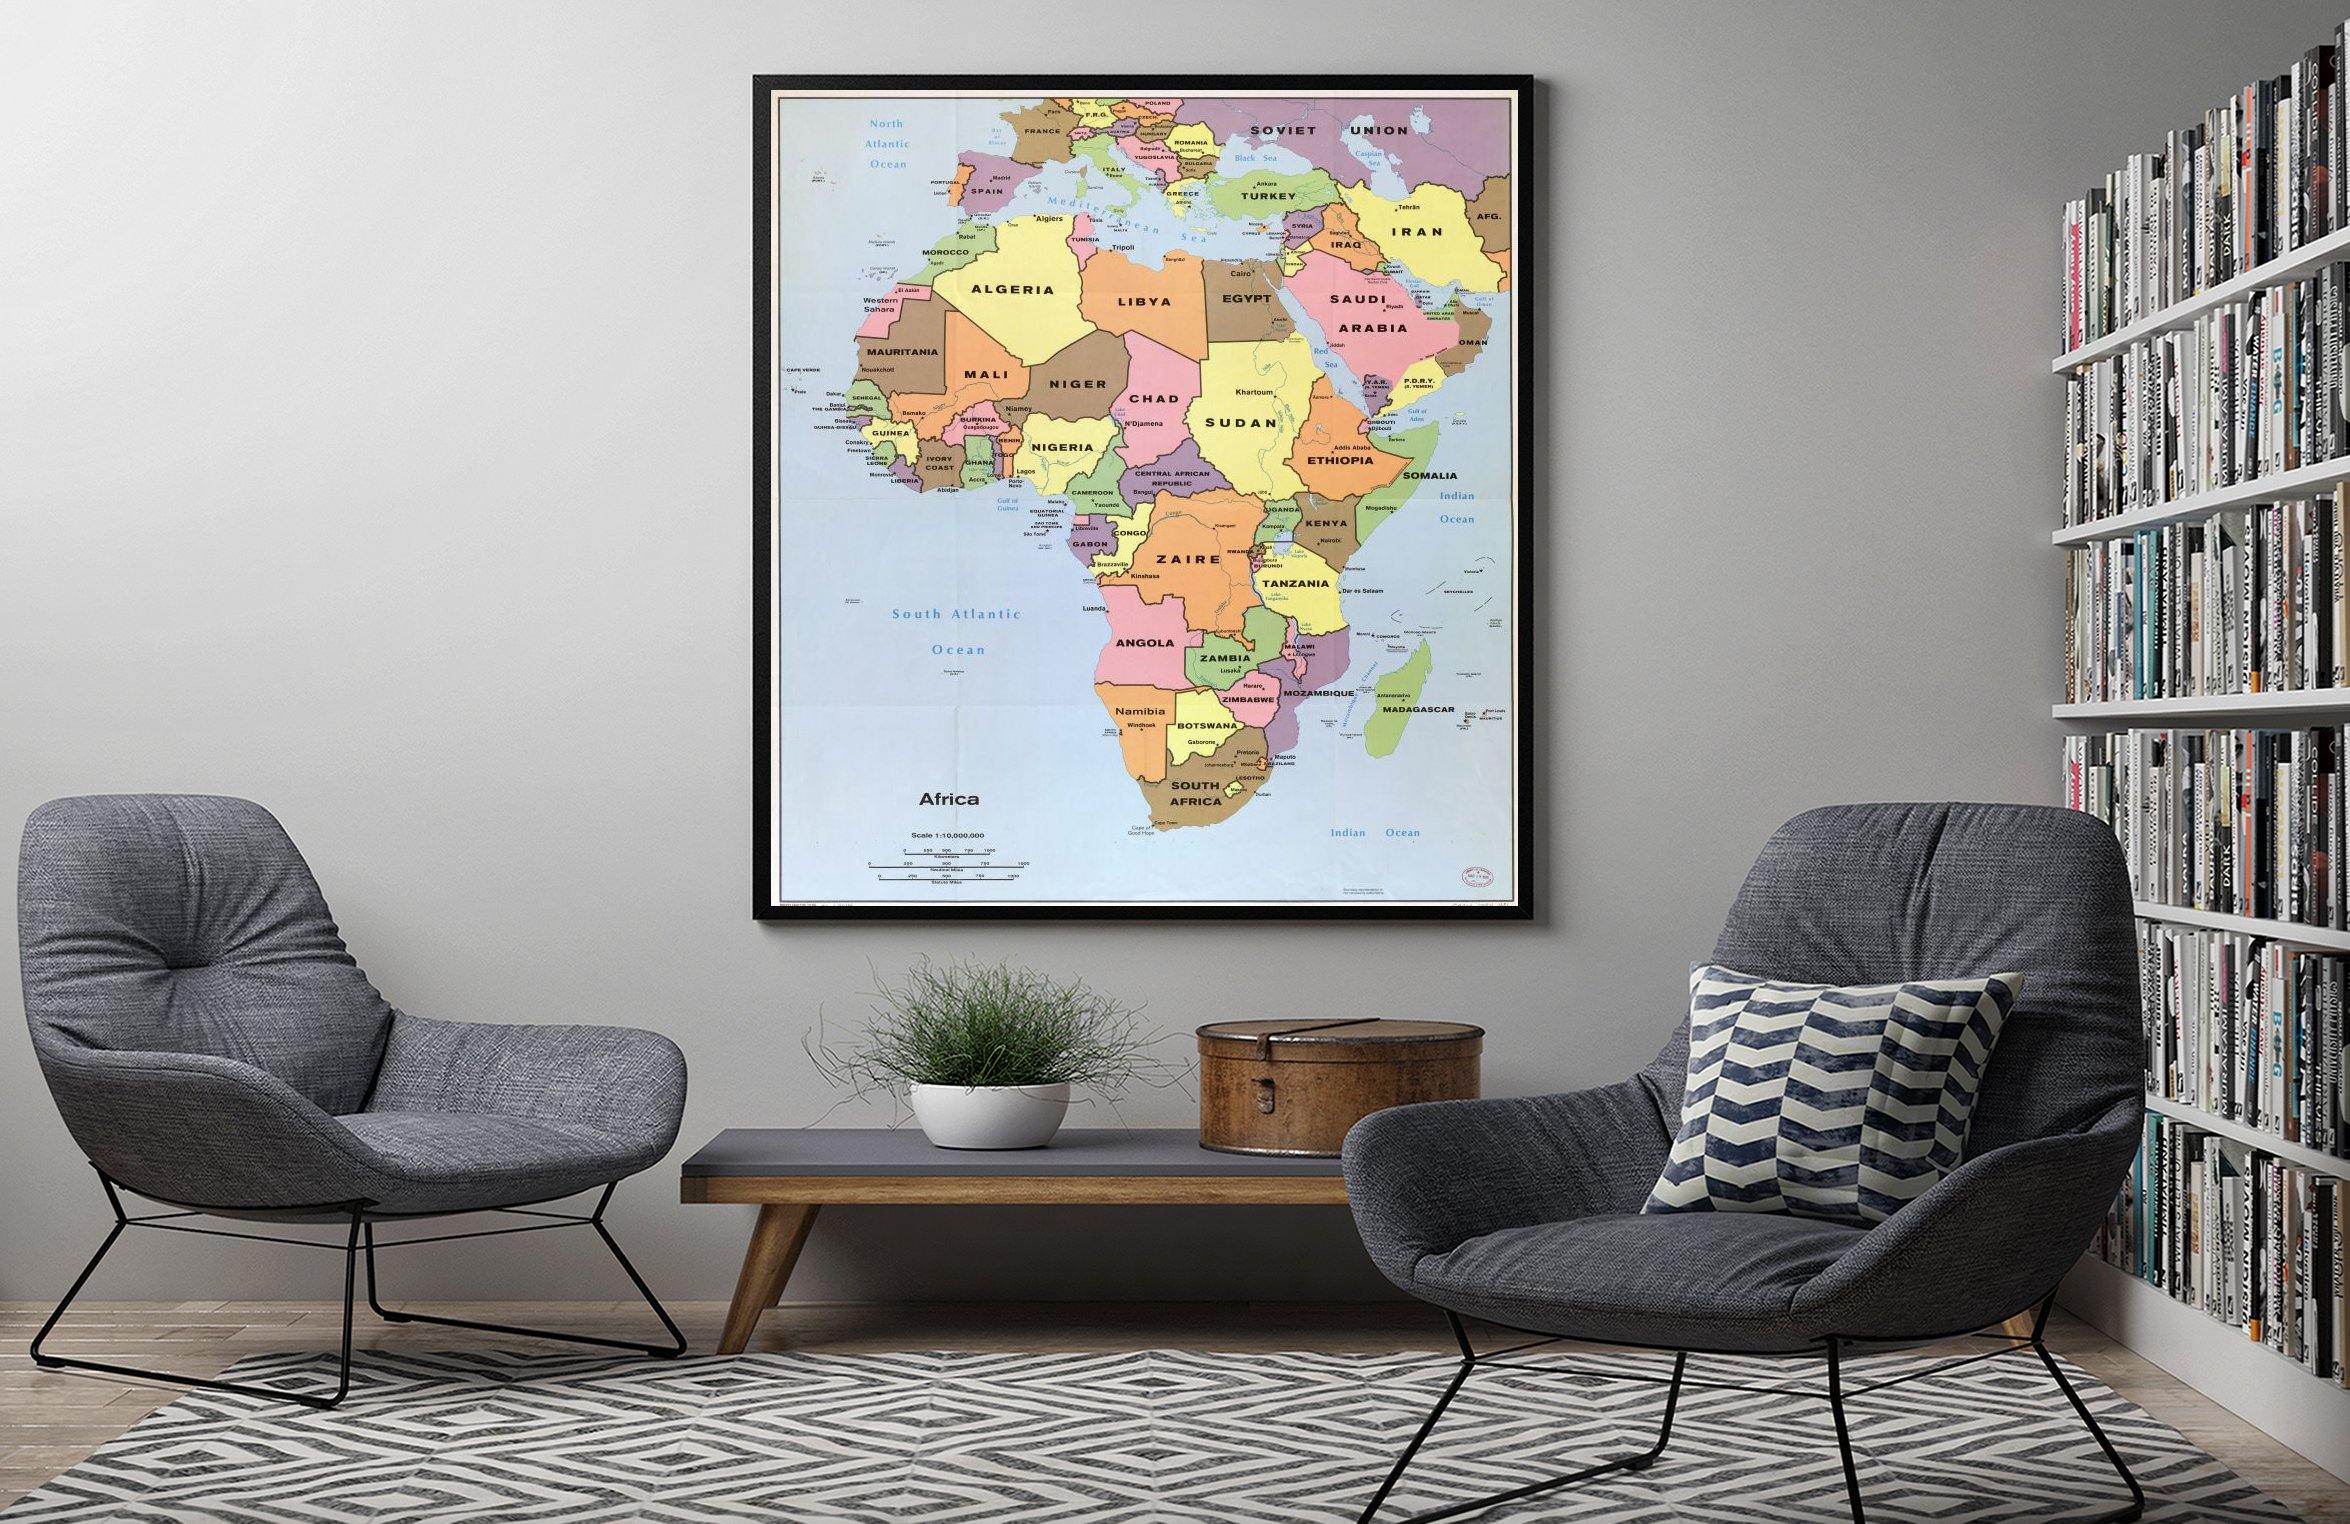 1984 Map| Africa| Africa Map Size: 22 inches x 24 inches |Fits 22x24 s - New York Map Company